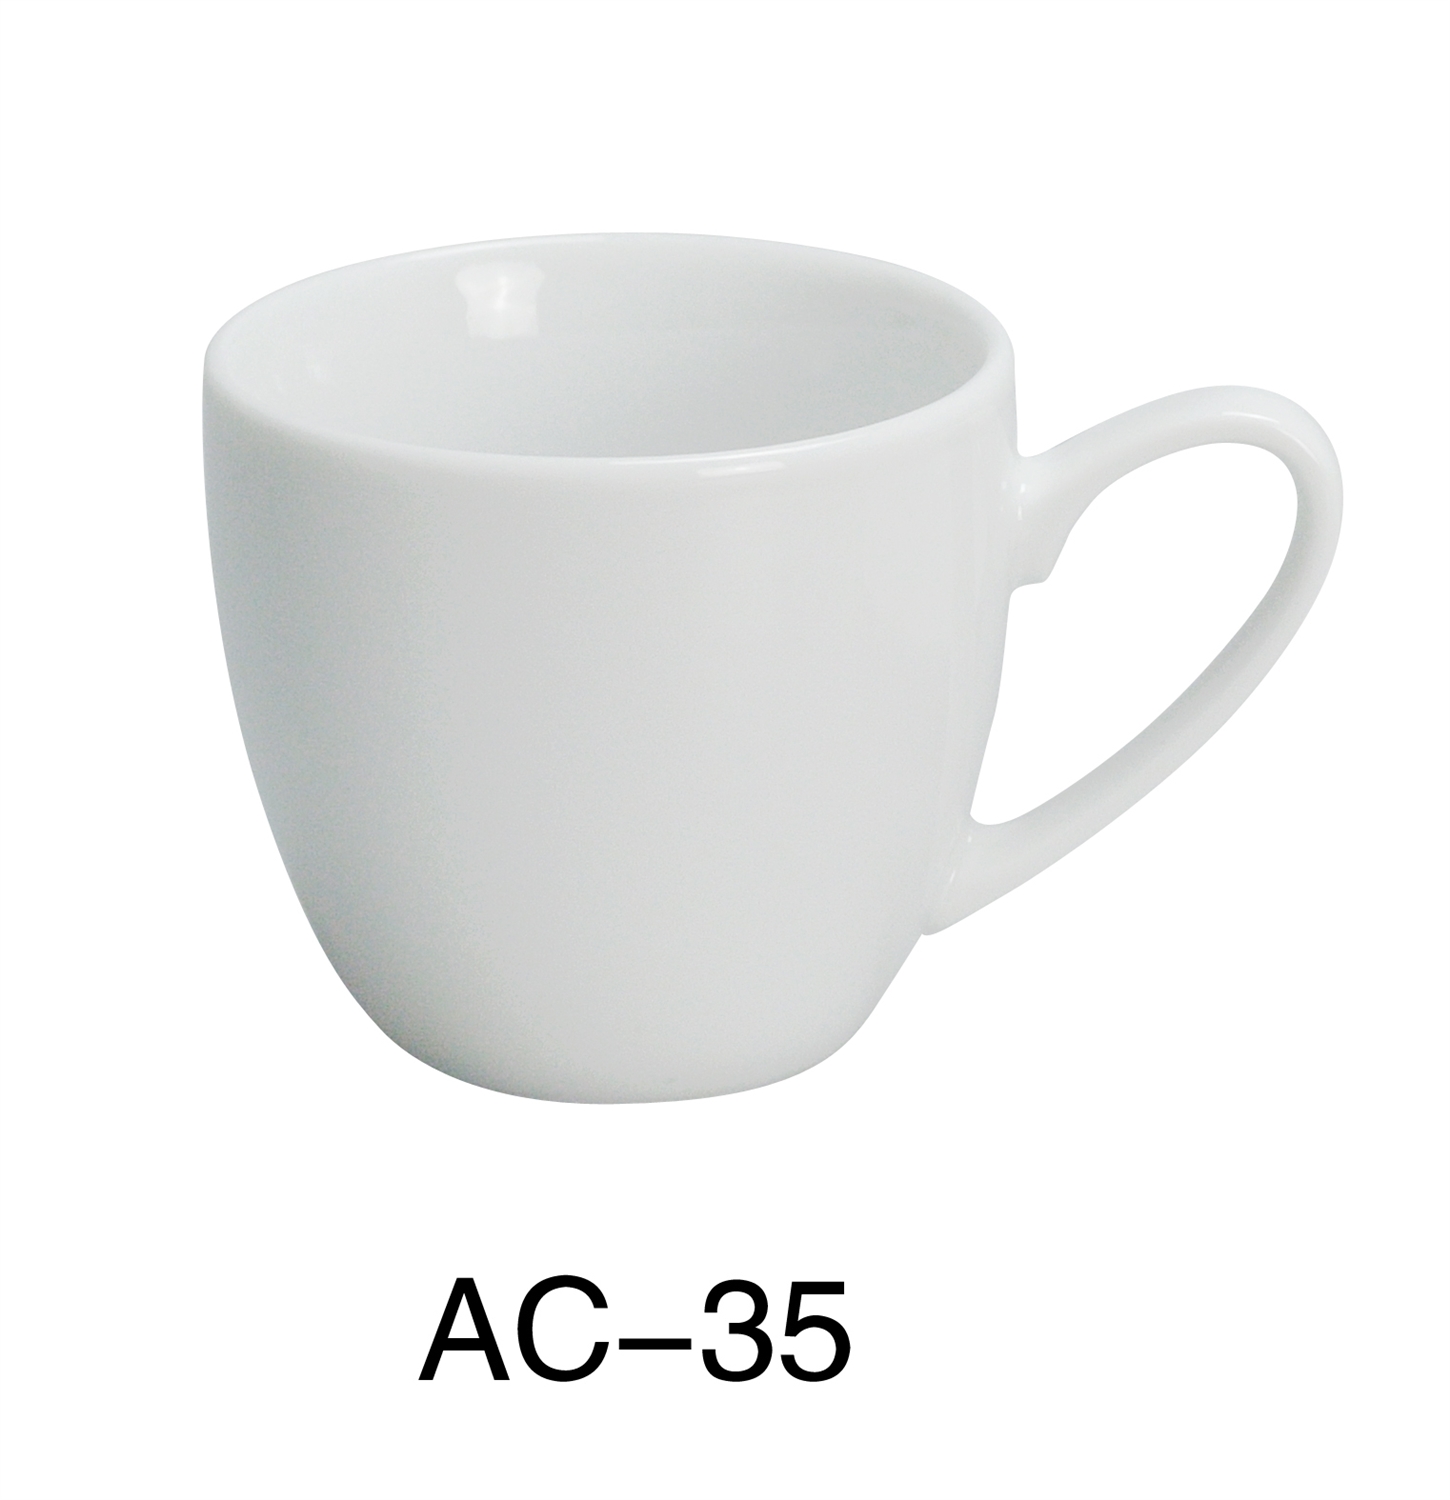 Yanco AC-35 ABCO Espresso Cup - made available by Celebrate Festival Inc